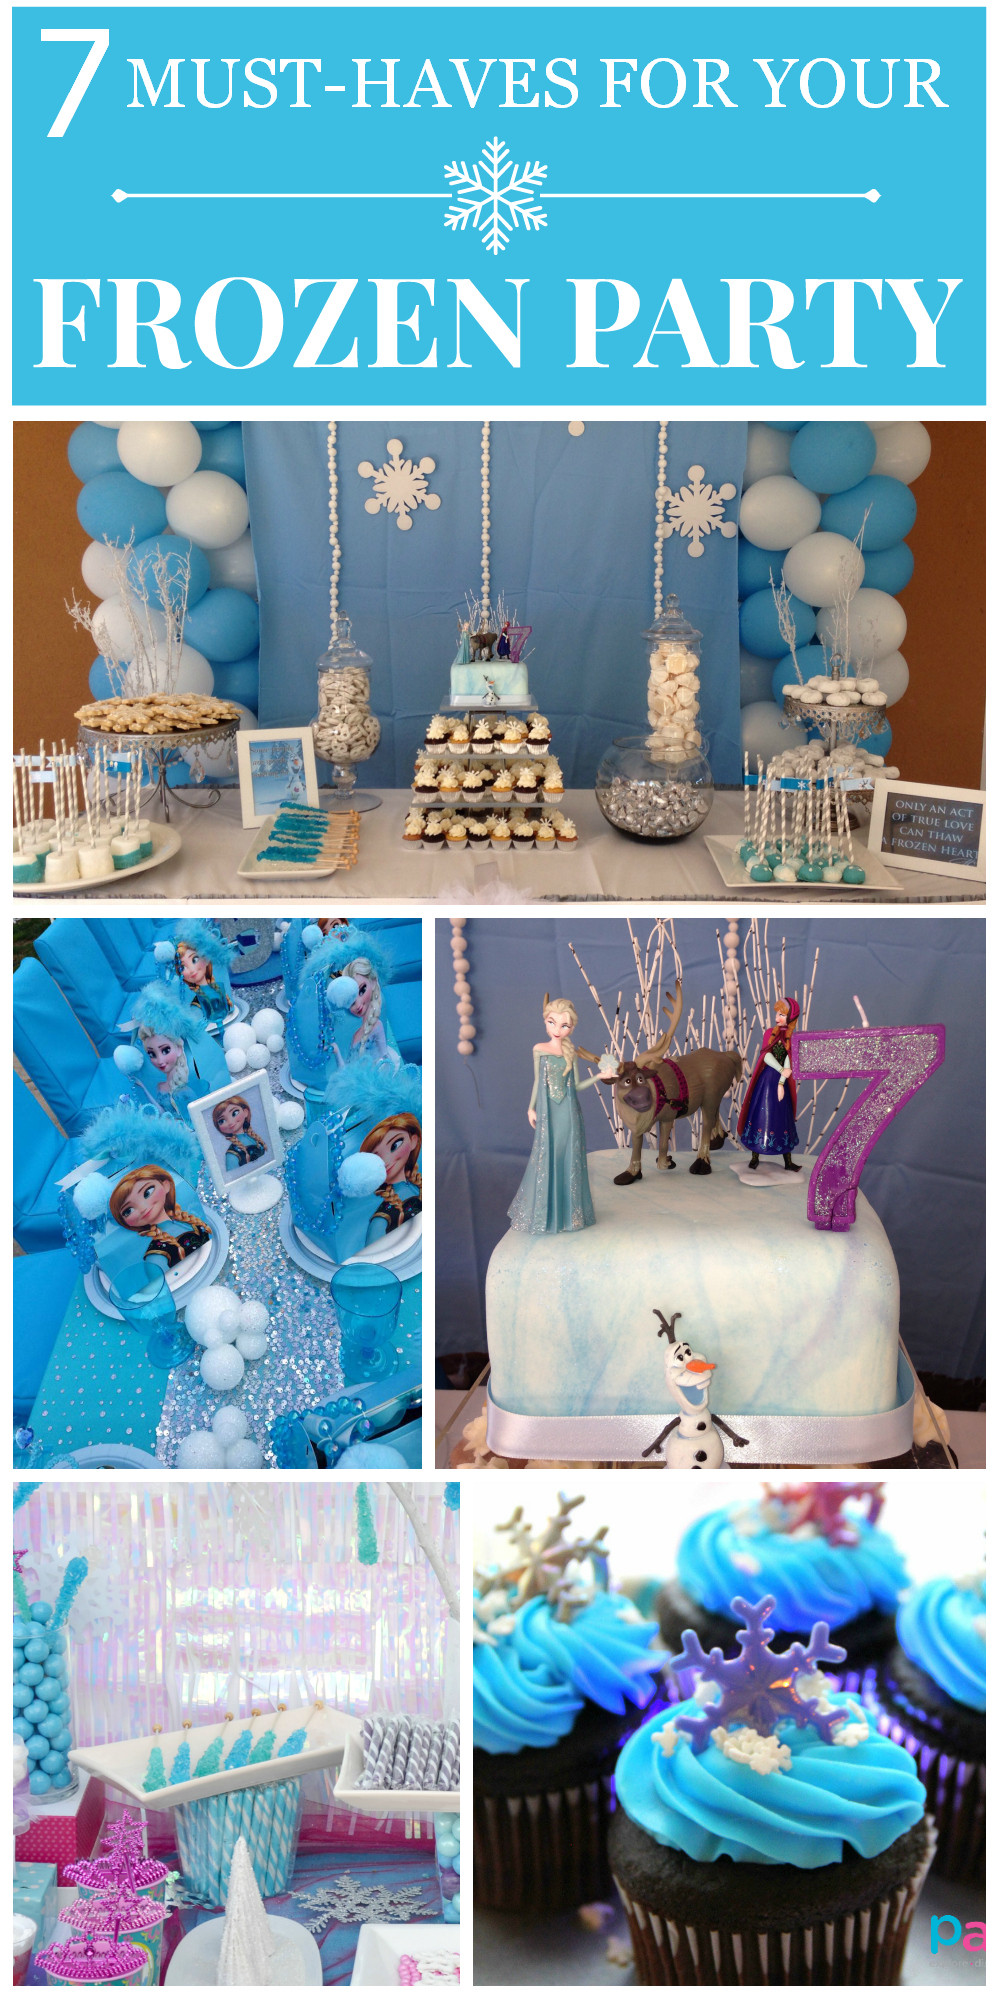 Frozen Birthday Decorations
 7 Things You Must Have at Your Frozen Party